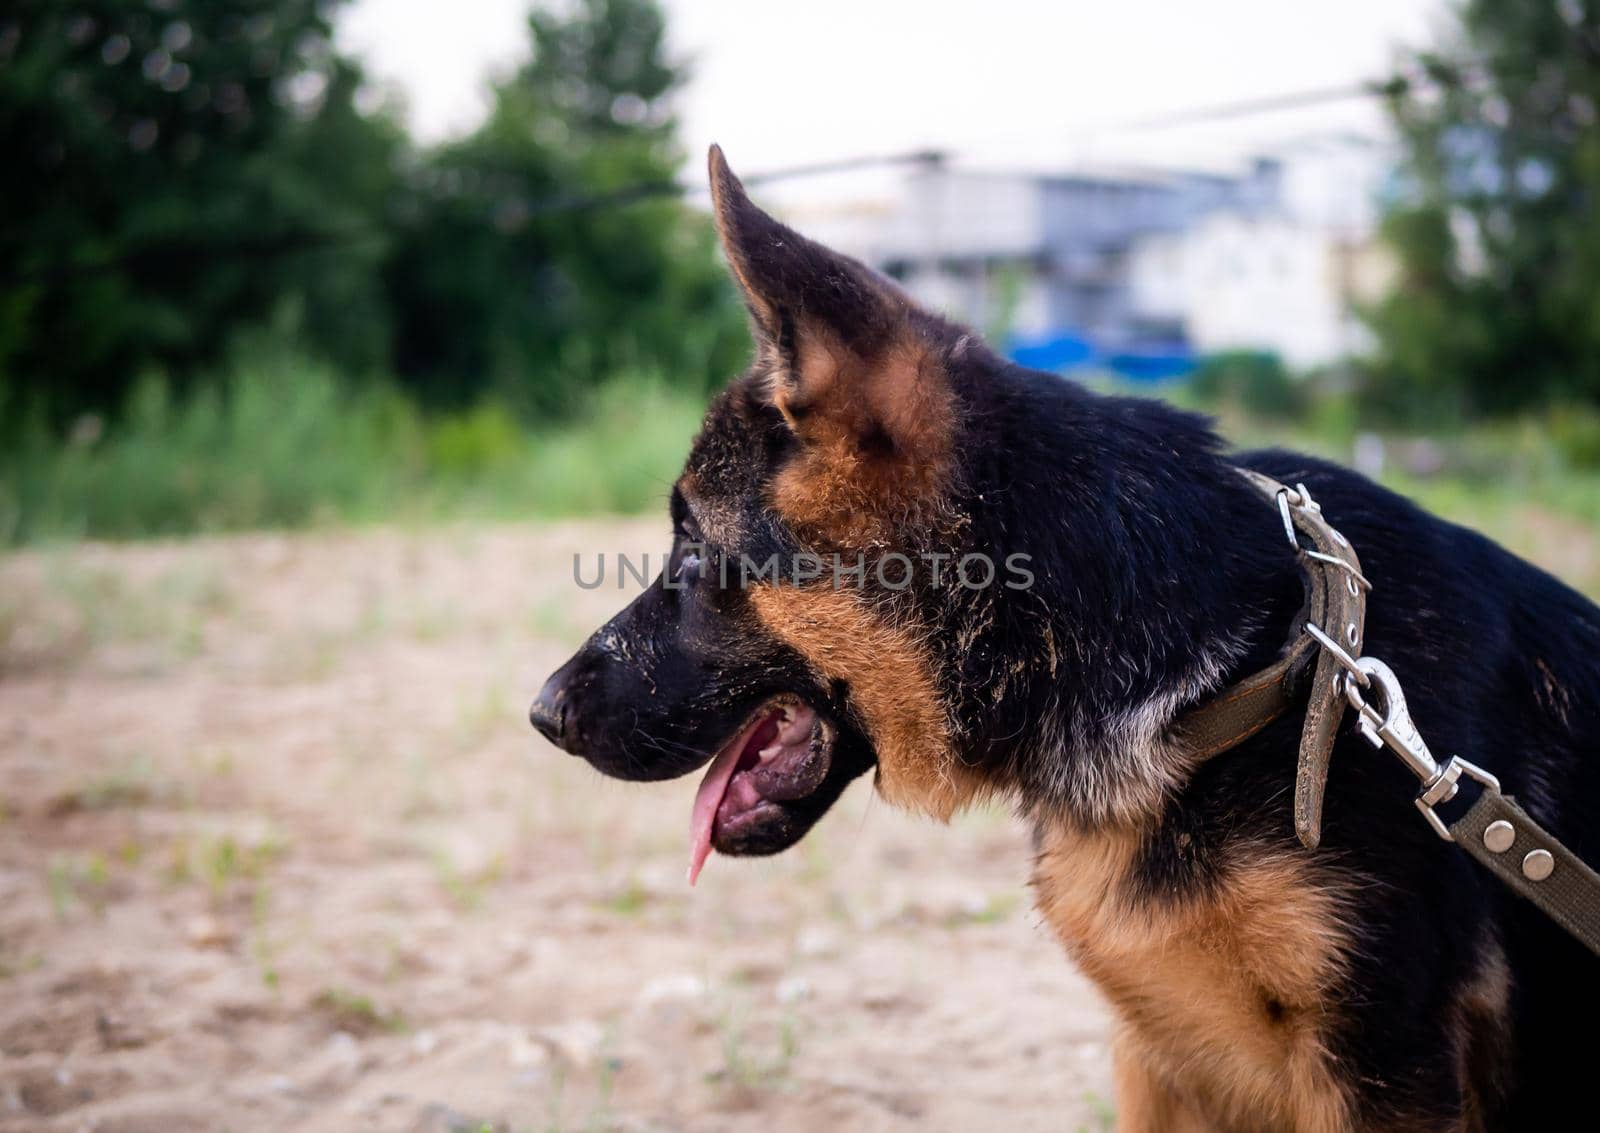 Portrait of a German Shepherd puppy. Walking in a residential area against the background of houses.